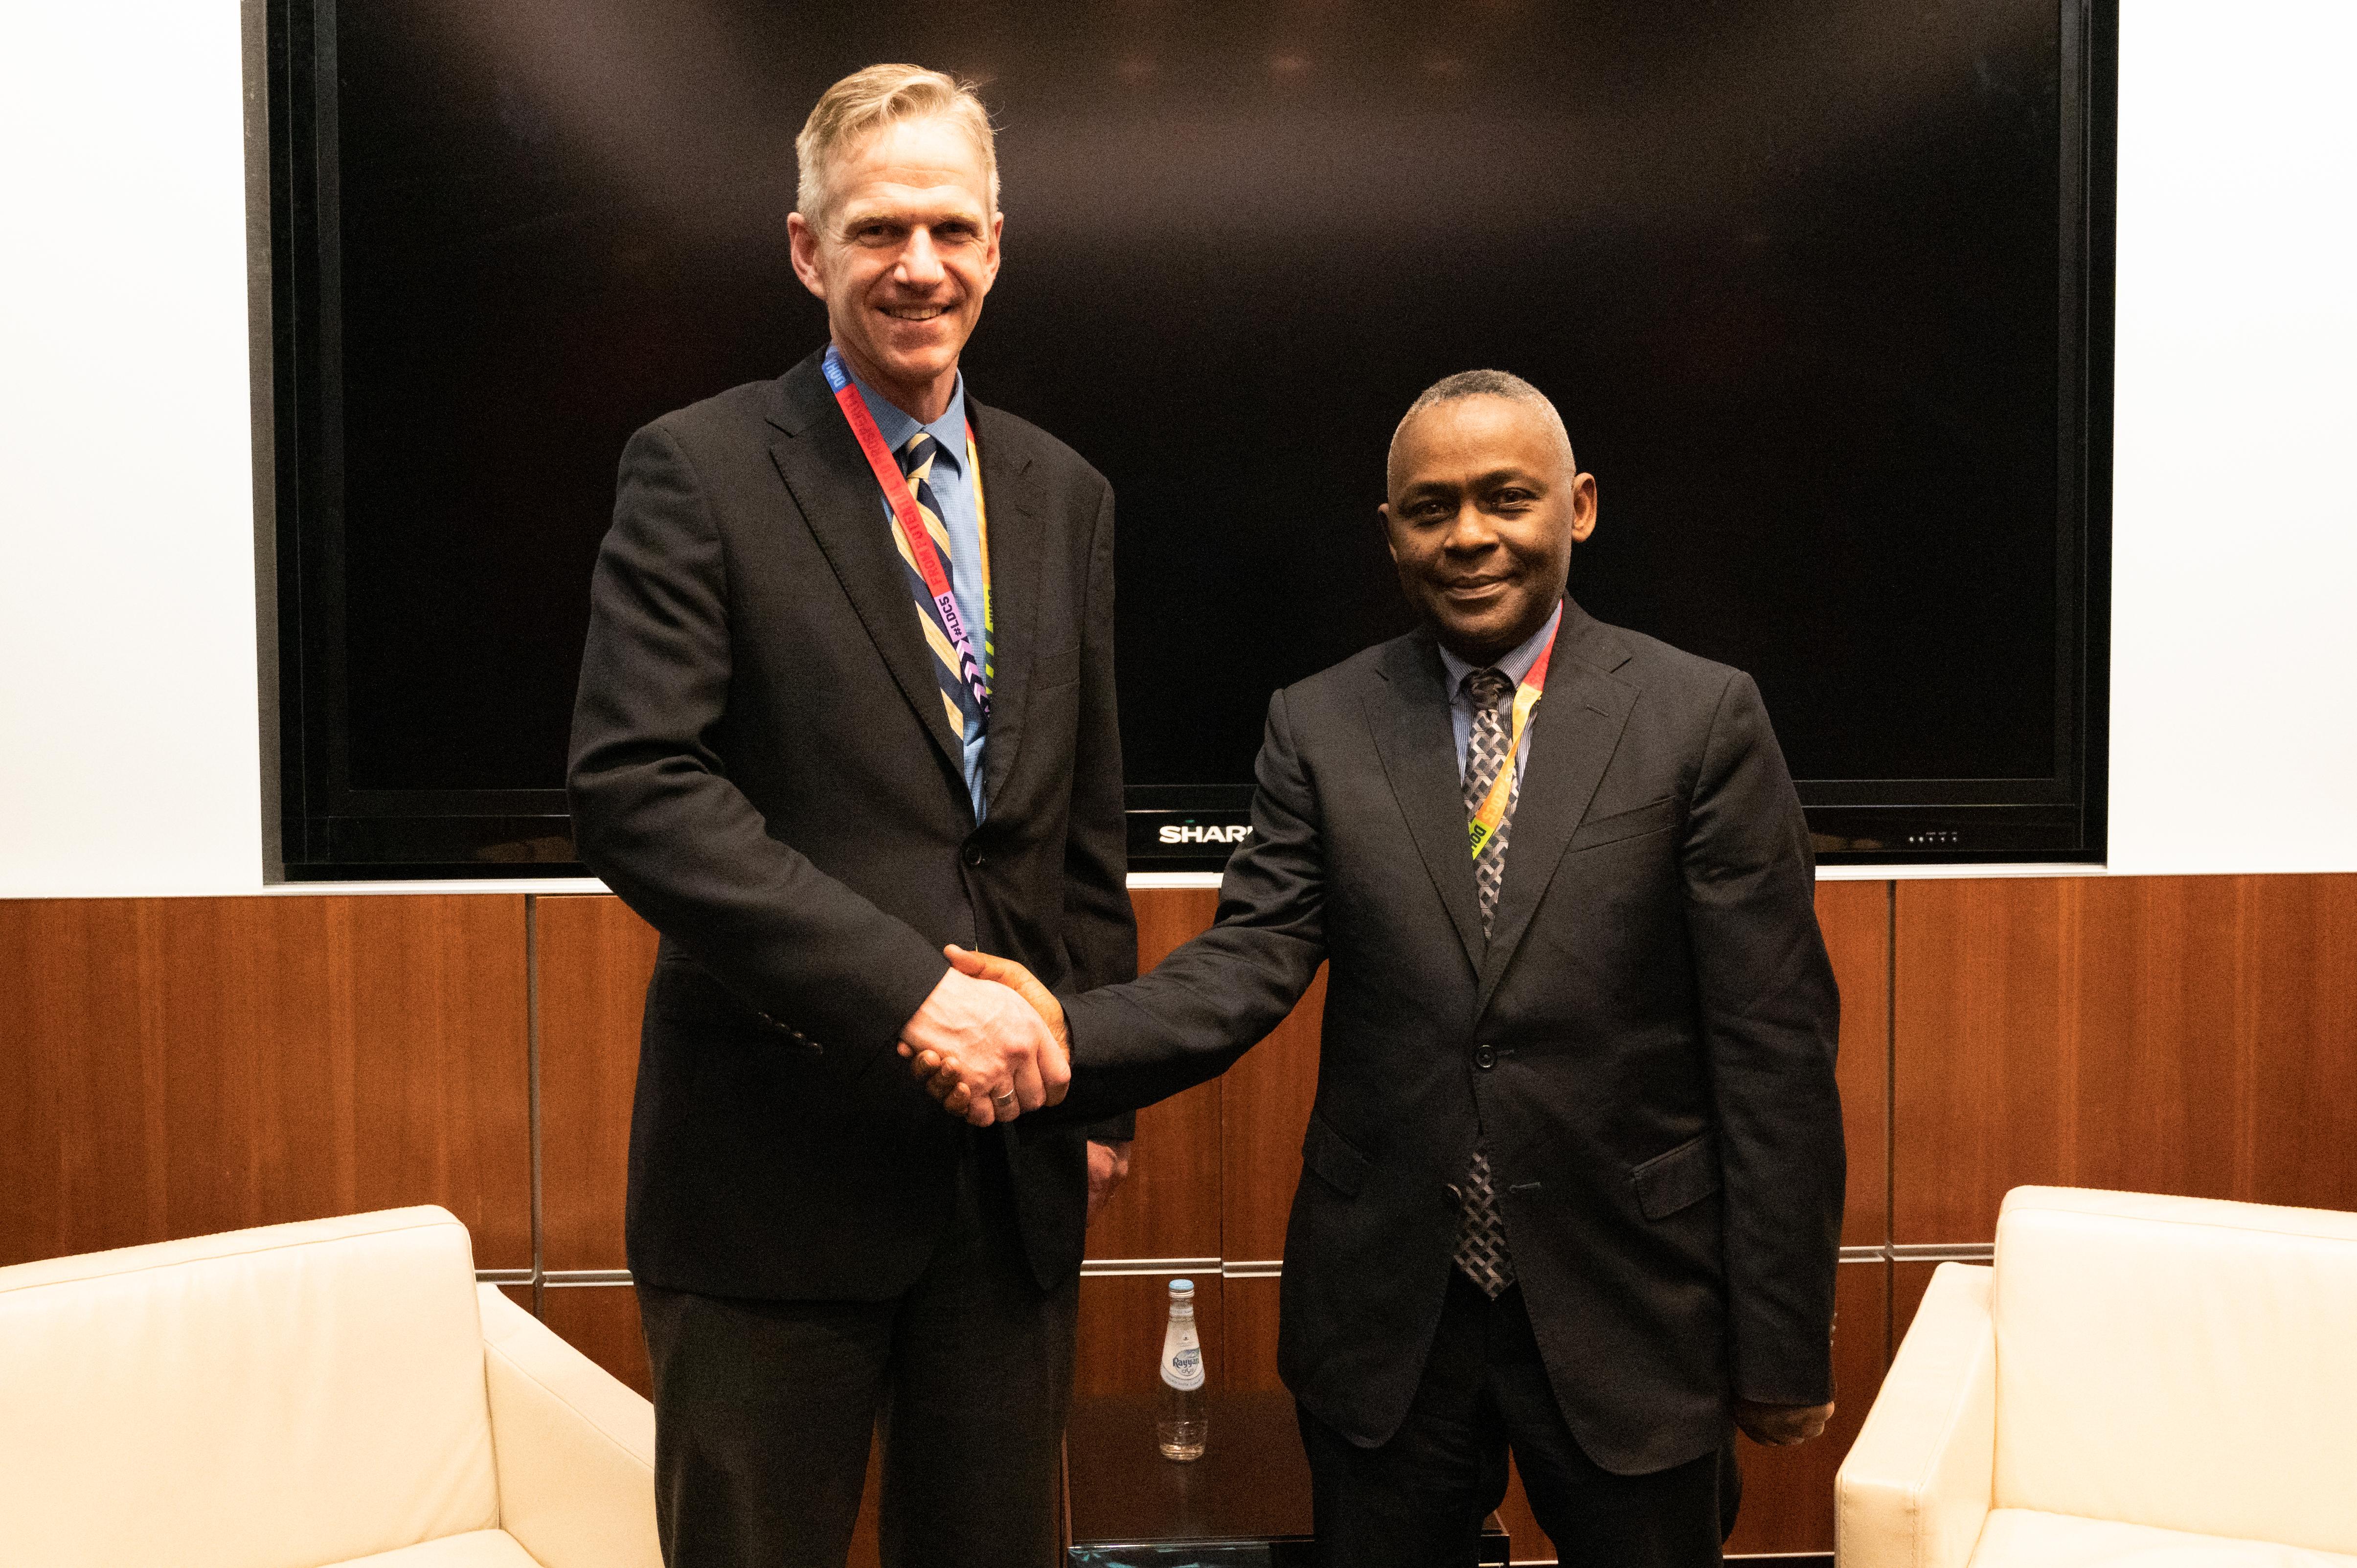 Drew Smith, Director-General for International Assistance Policy, Canada (left) and Prof. Murenzi (photo: G. Ortolani/TWAS)